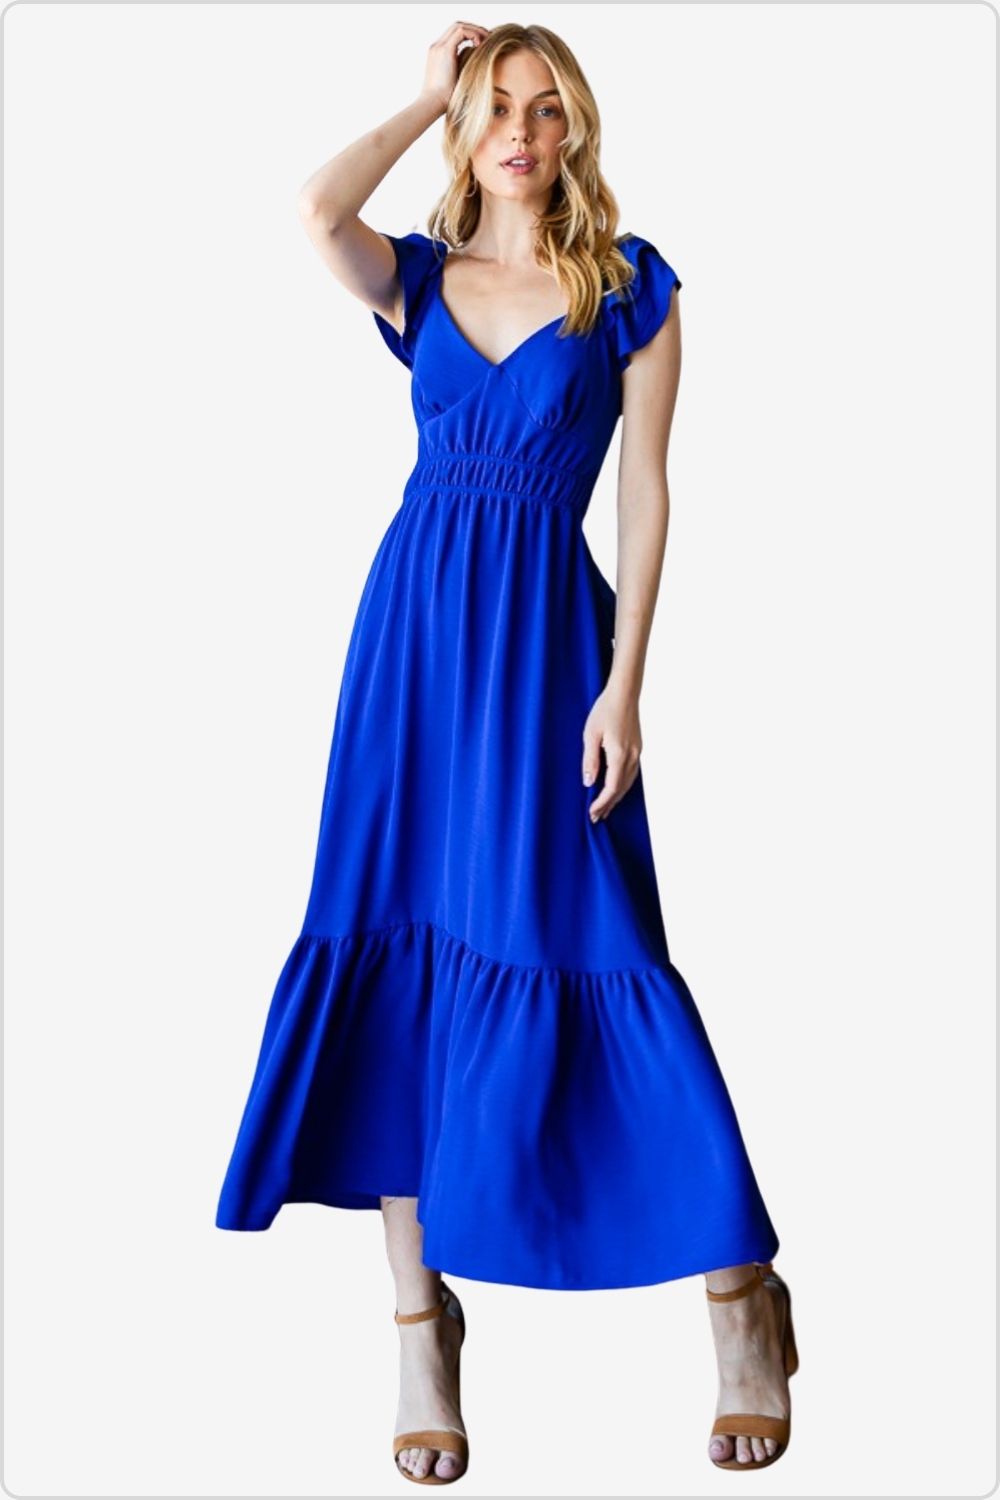 Elegant sleeveless ruffled midi dress with tie back detail, front view